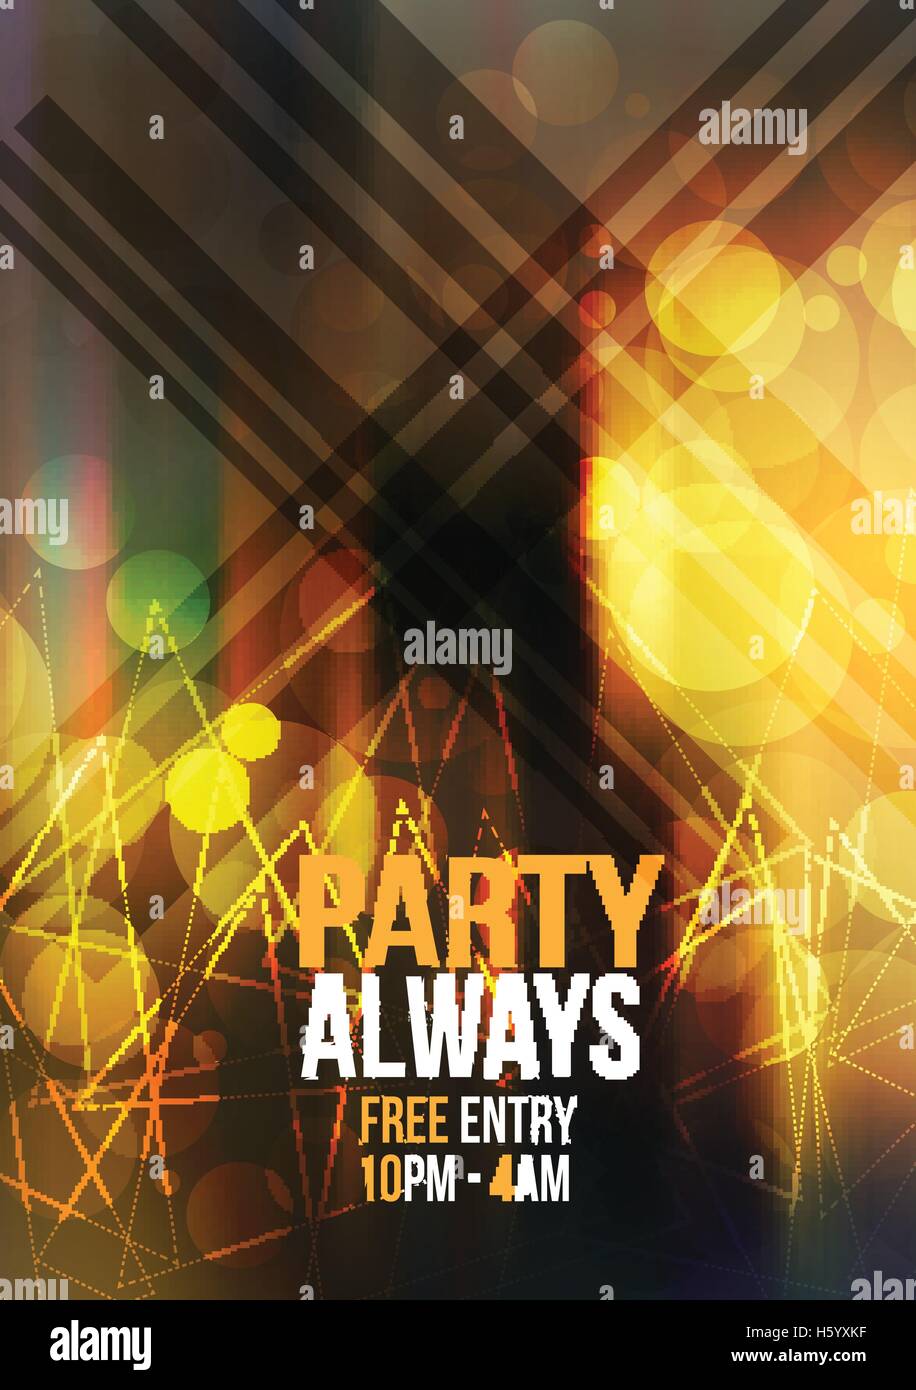 Party Flyer Background Vector Illustration Stock Vector Image Art Alamy